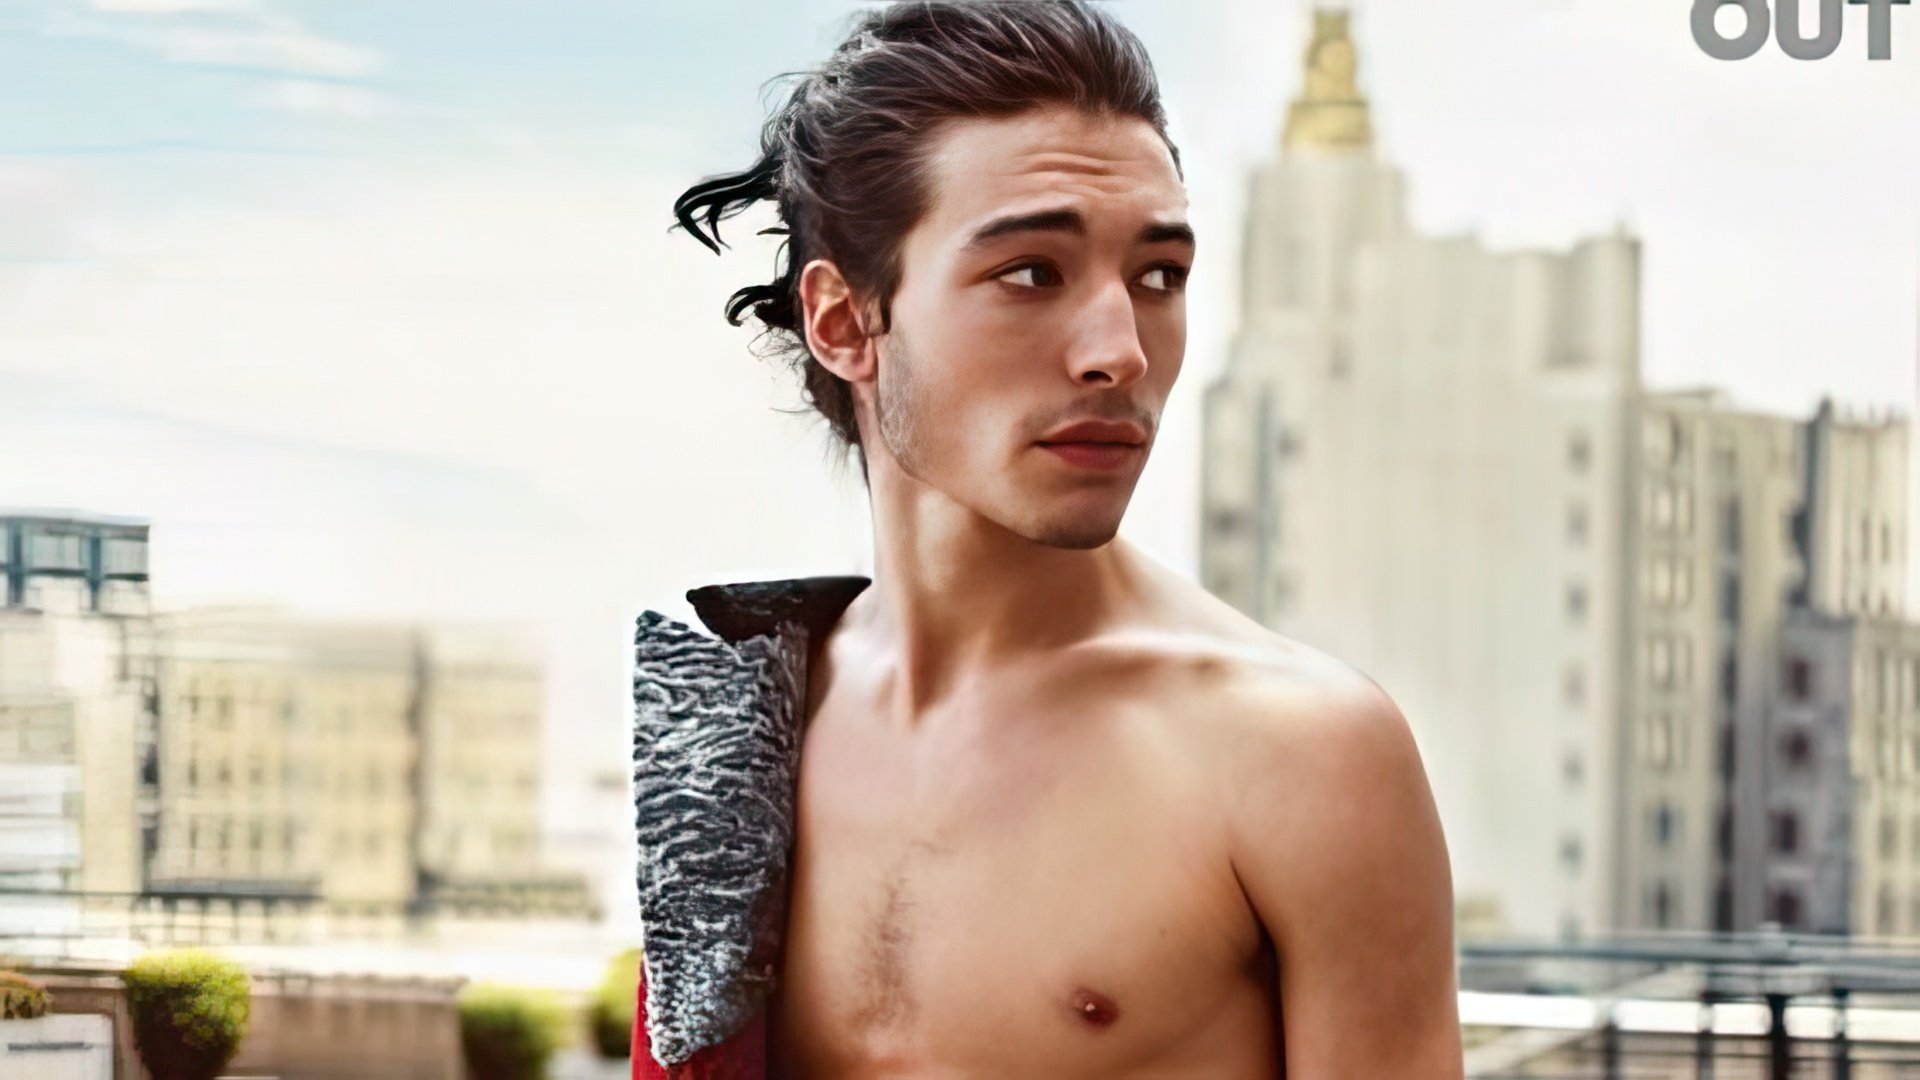 In 2012 Ezra Miller came out as queer